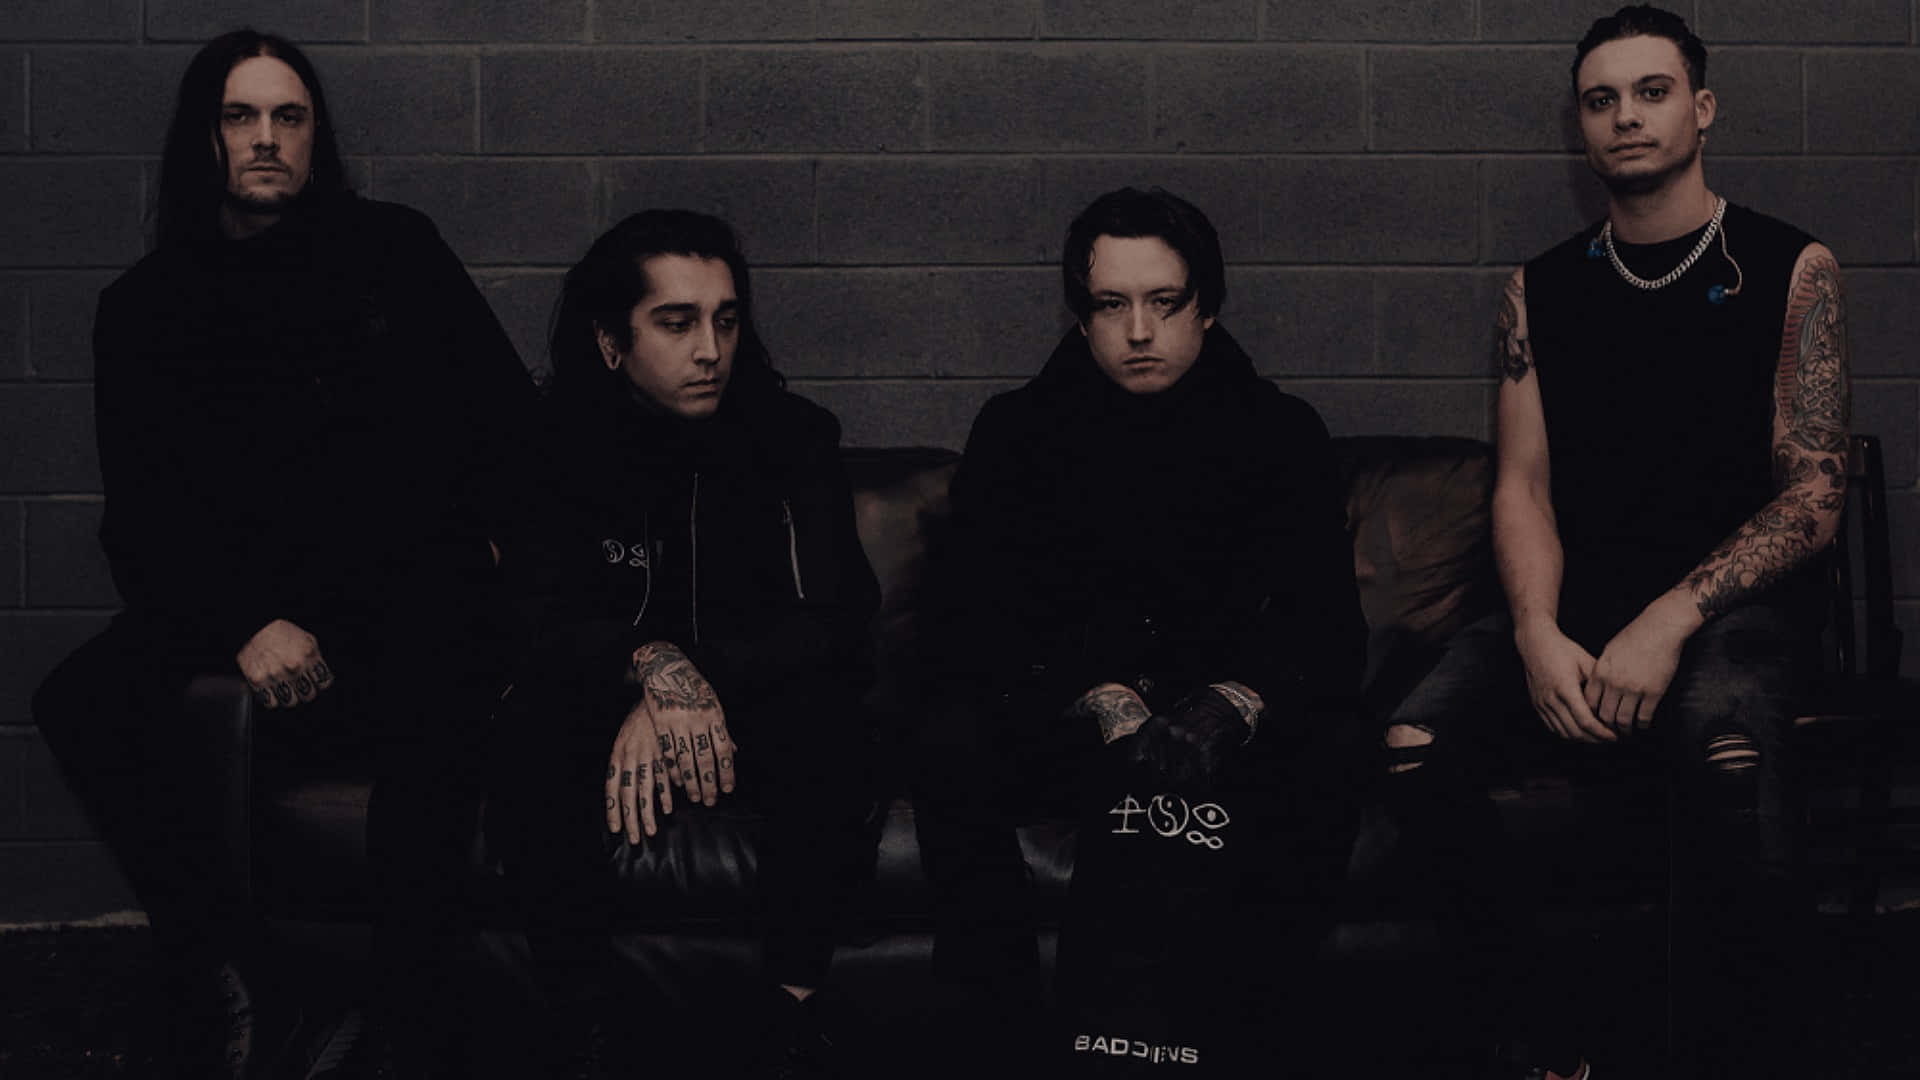 Bad Omens Band Moody Group Portrait Wallpaper